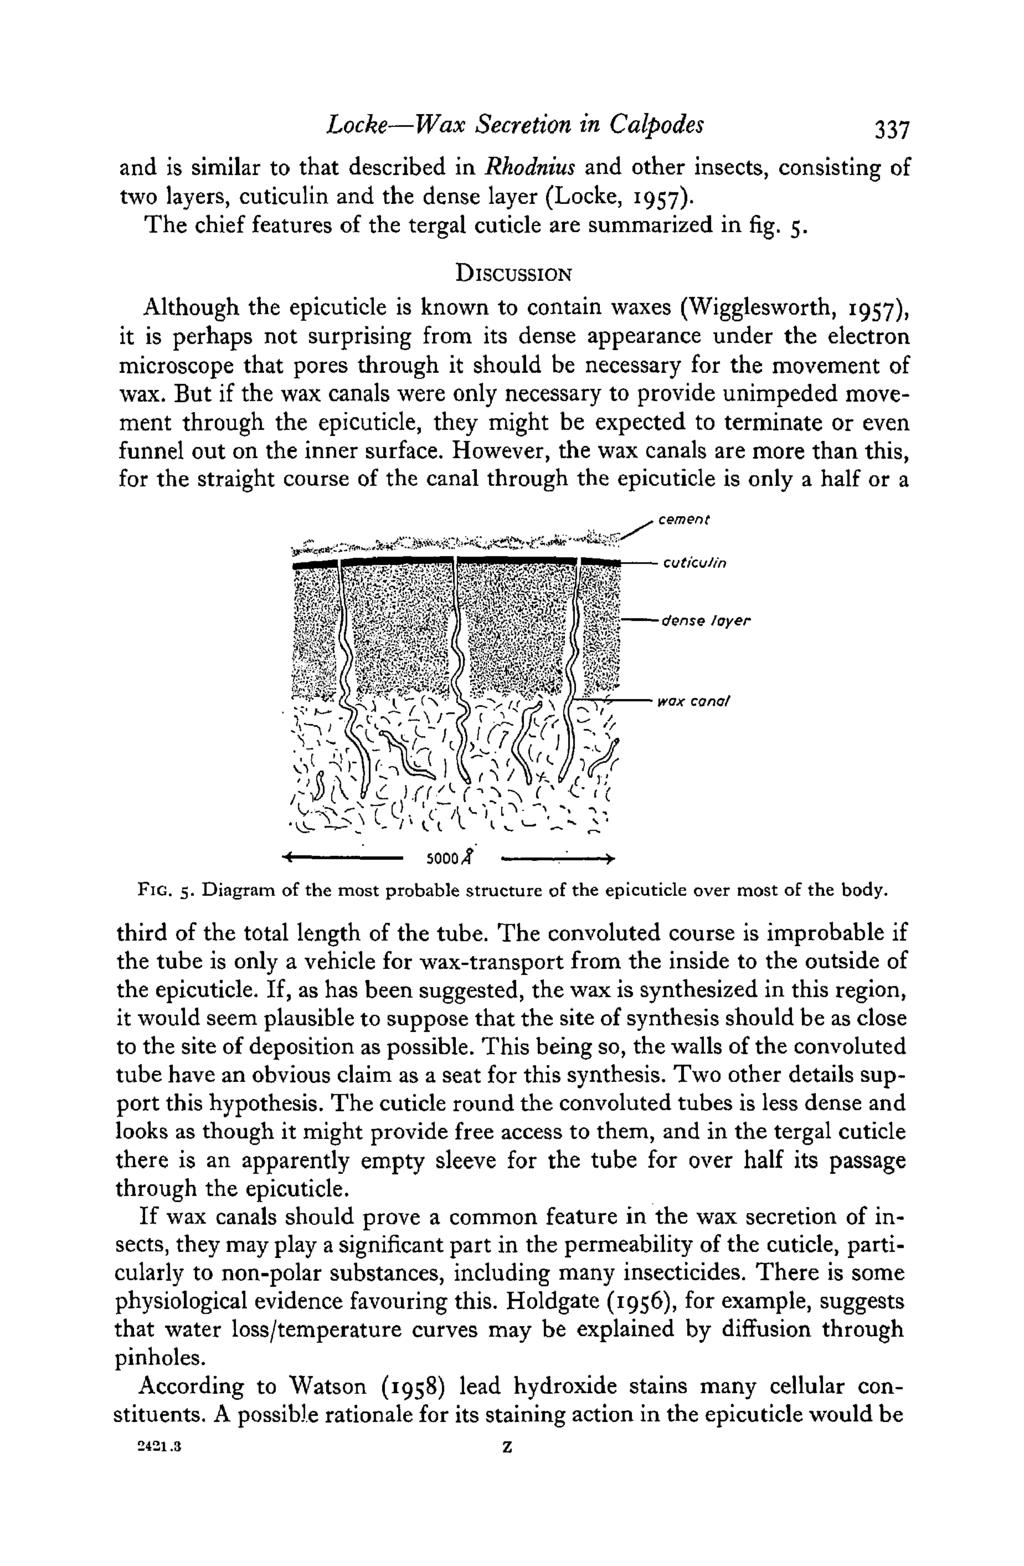 Locke Wax Secretion in Calpodes 337 and is similar to that described in Rhodnius and other insects, consisting of two layers, cuticulin and the dense layer (Locke, 1957).